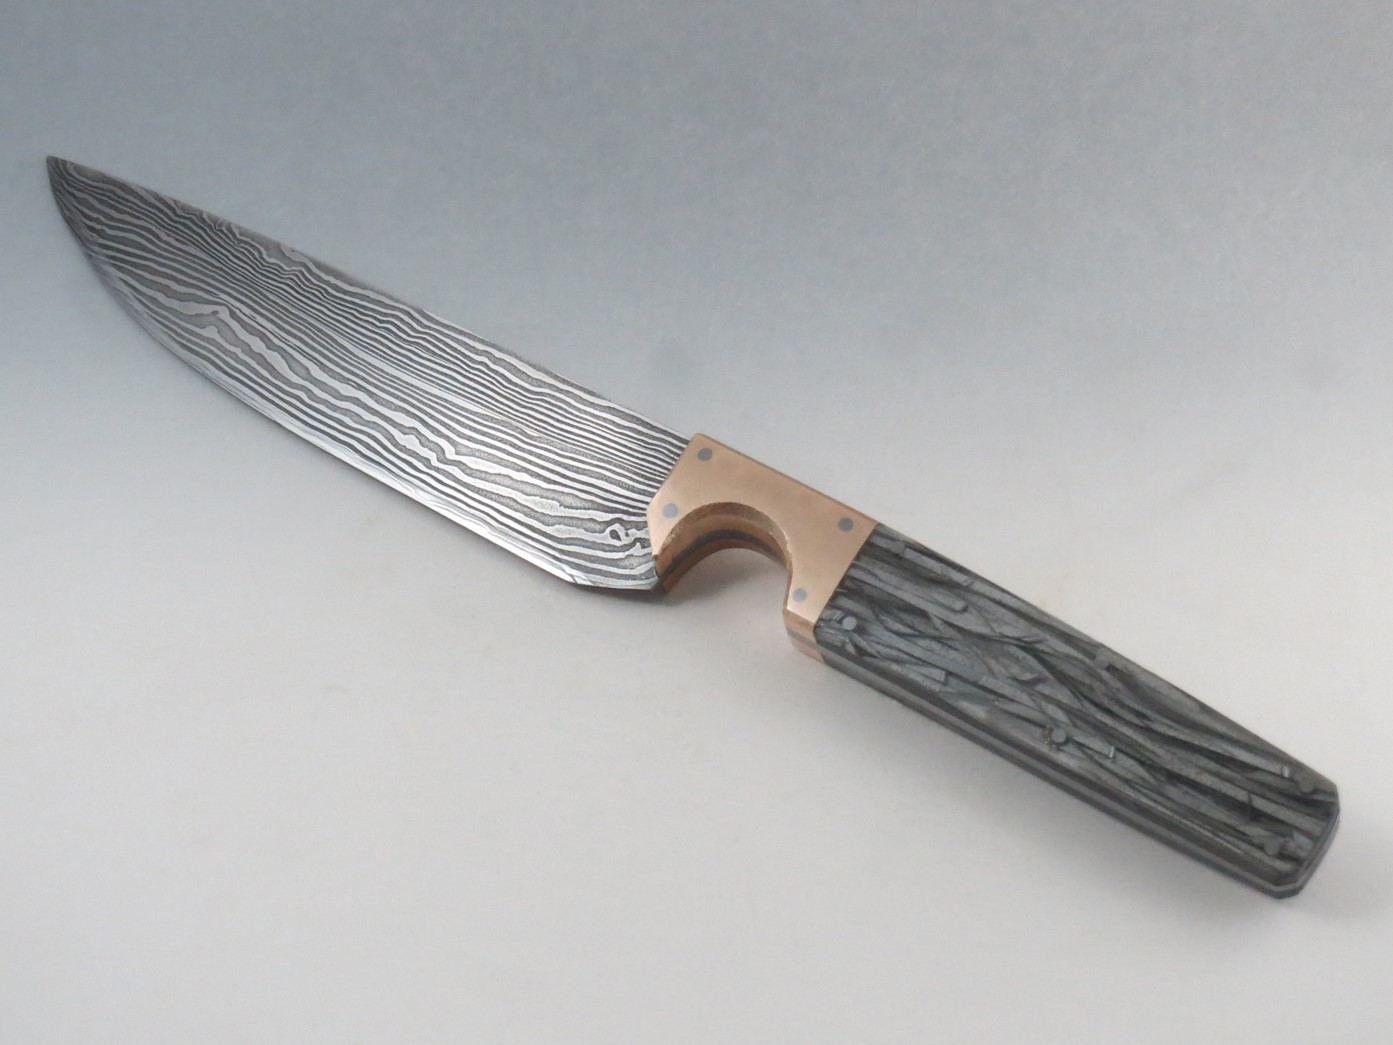 Knife titled Lines and Ribbons